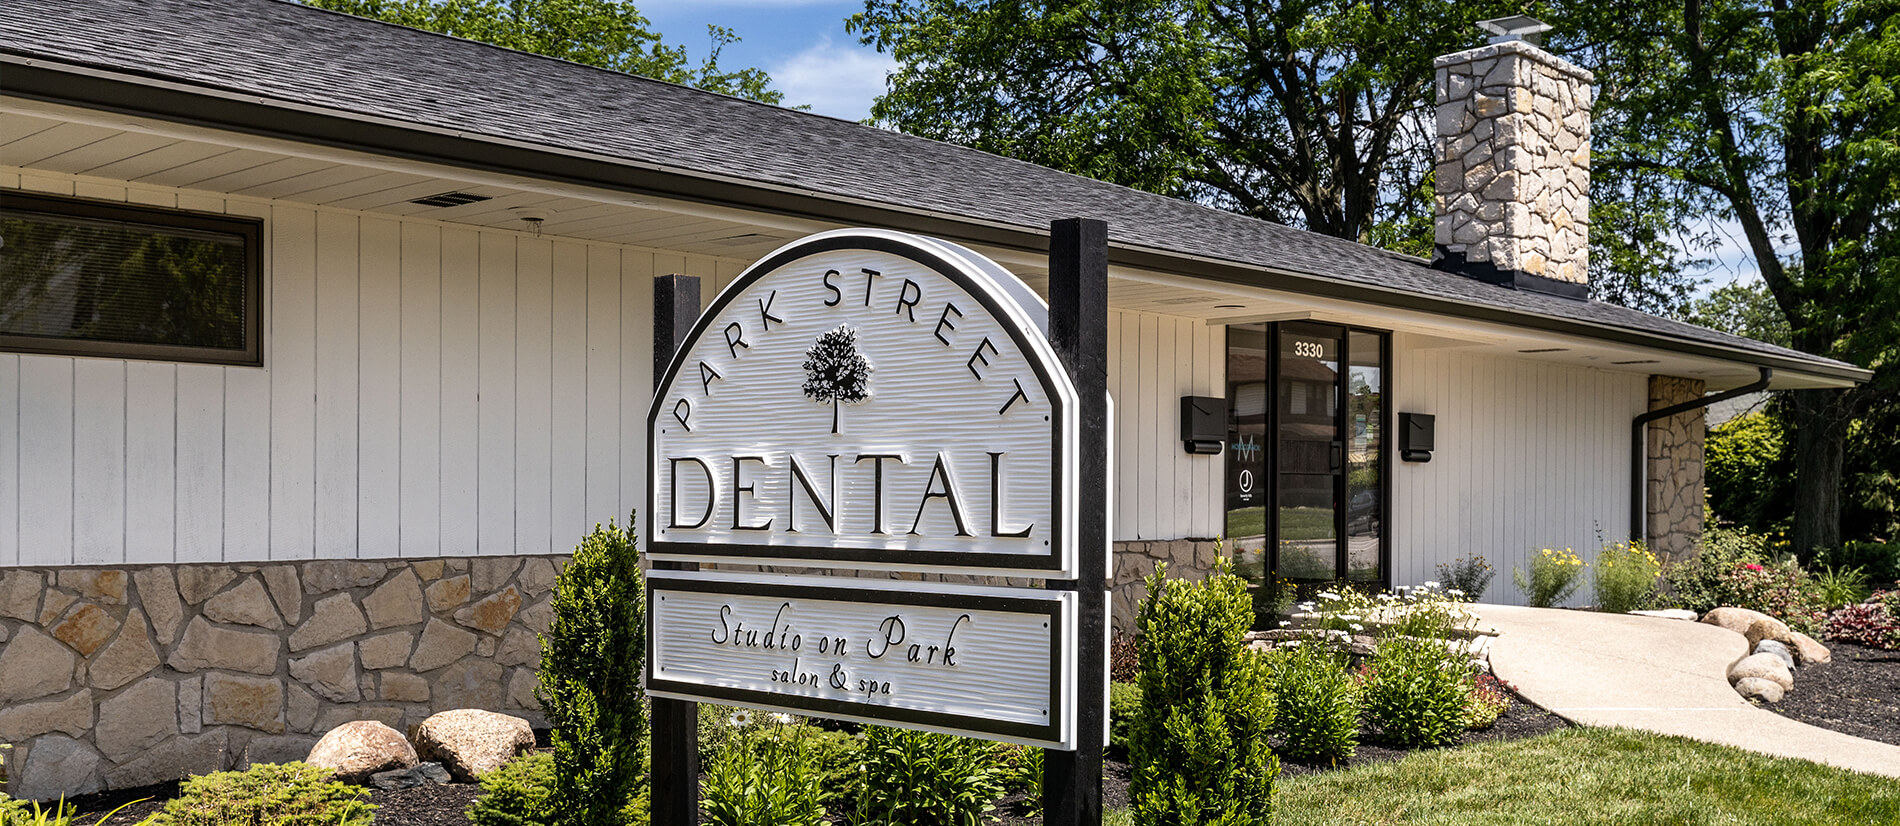 Outside view of Grove City Ohio dental office